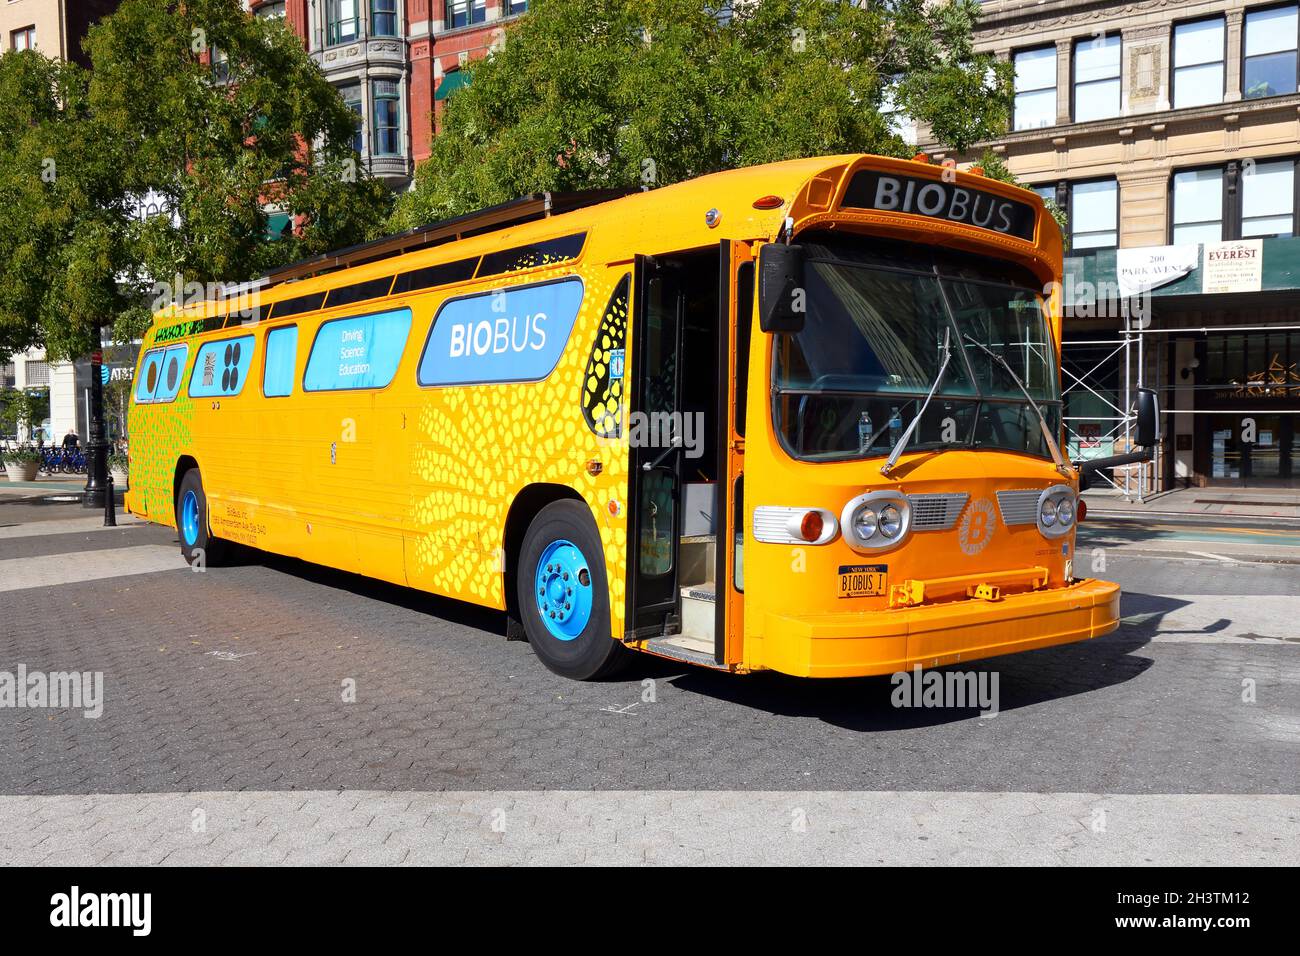 BioBus, a mobile school science lab with equipment powered by solar ...